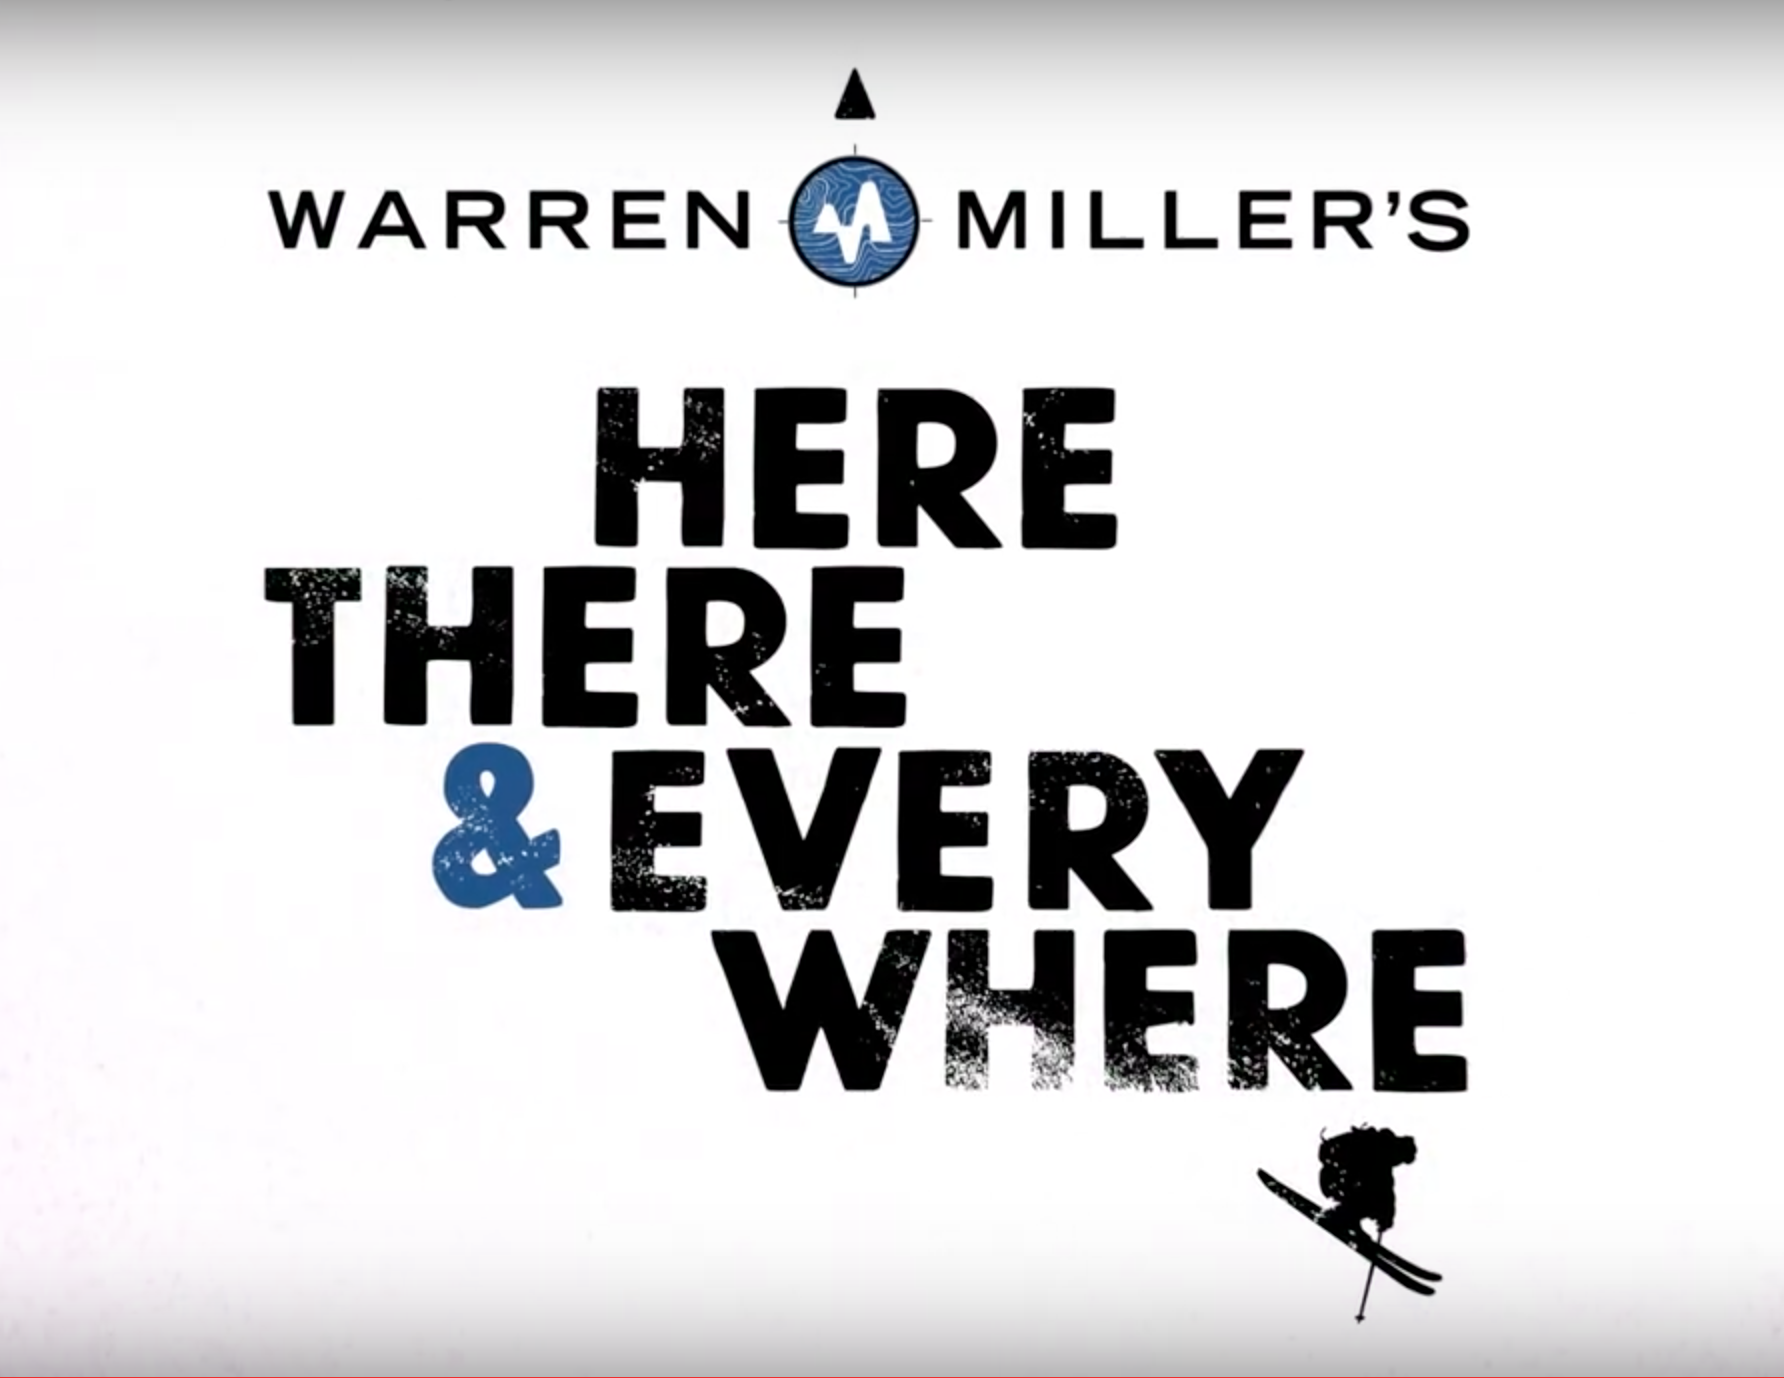 Win two tickets from Canadian Adventure Company to Warren Miller's 